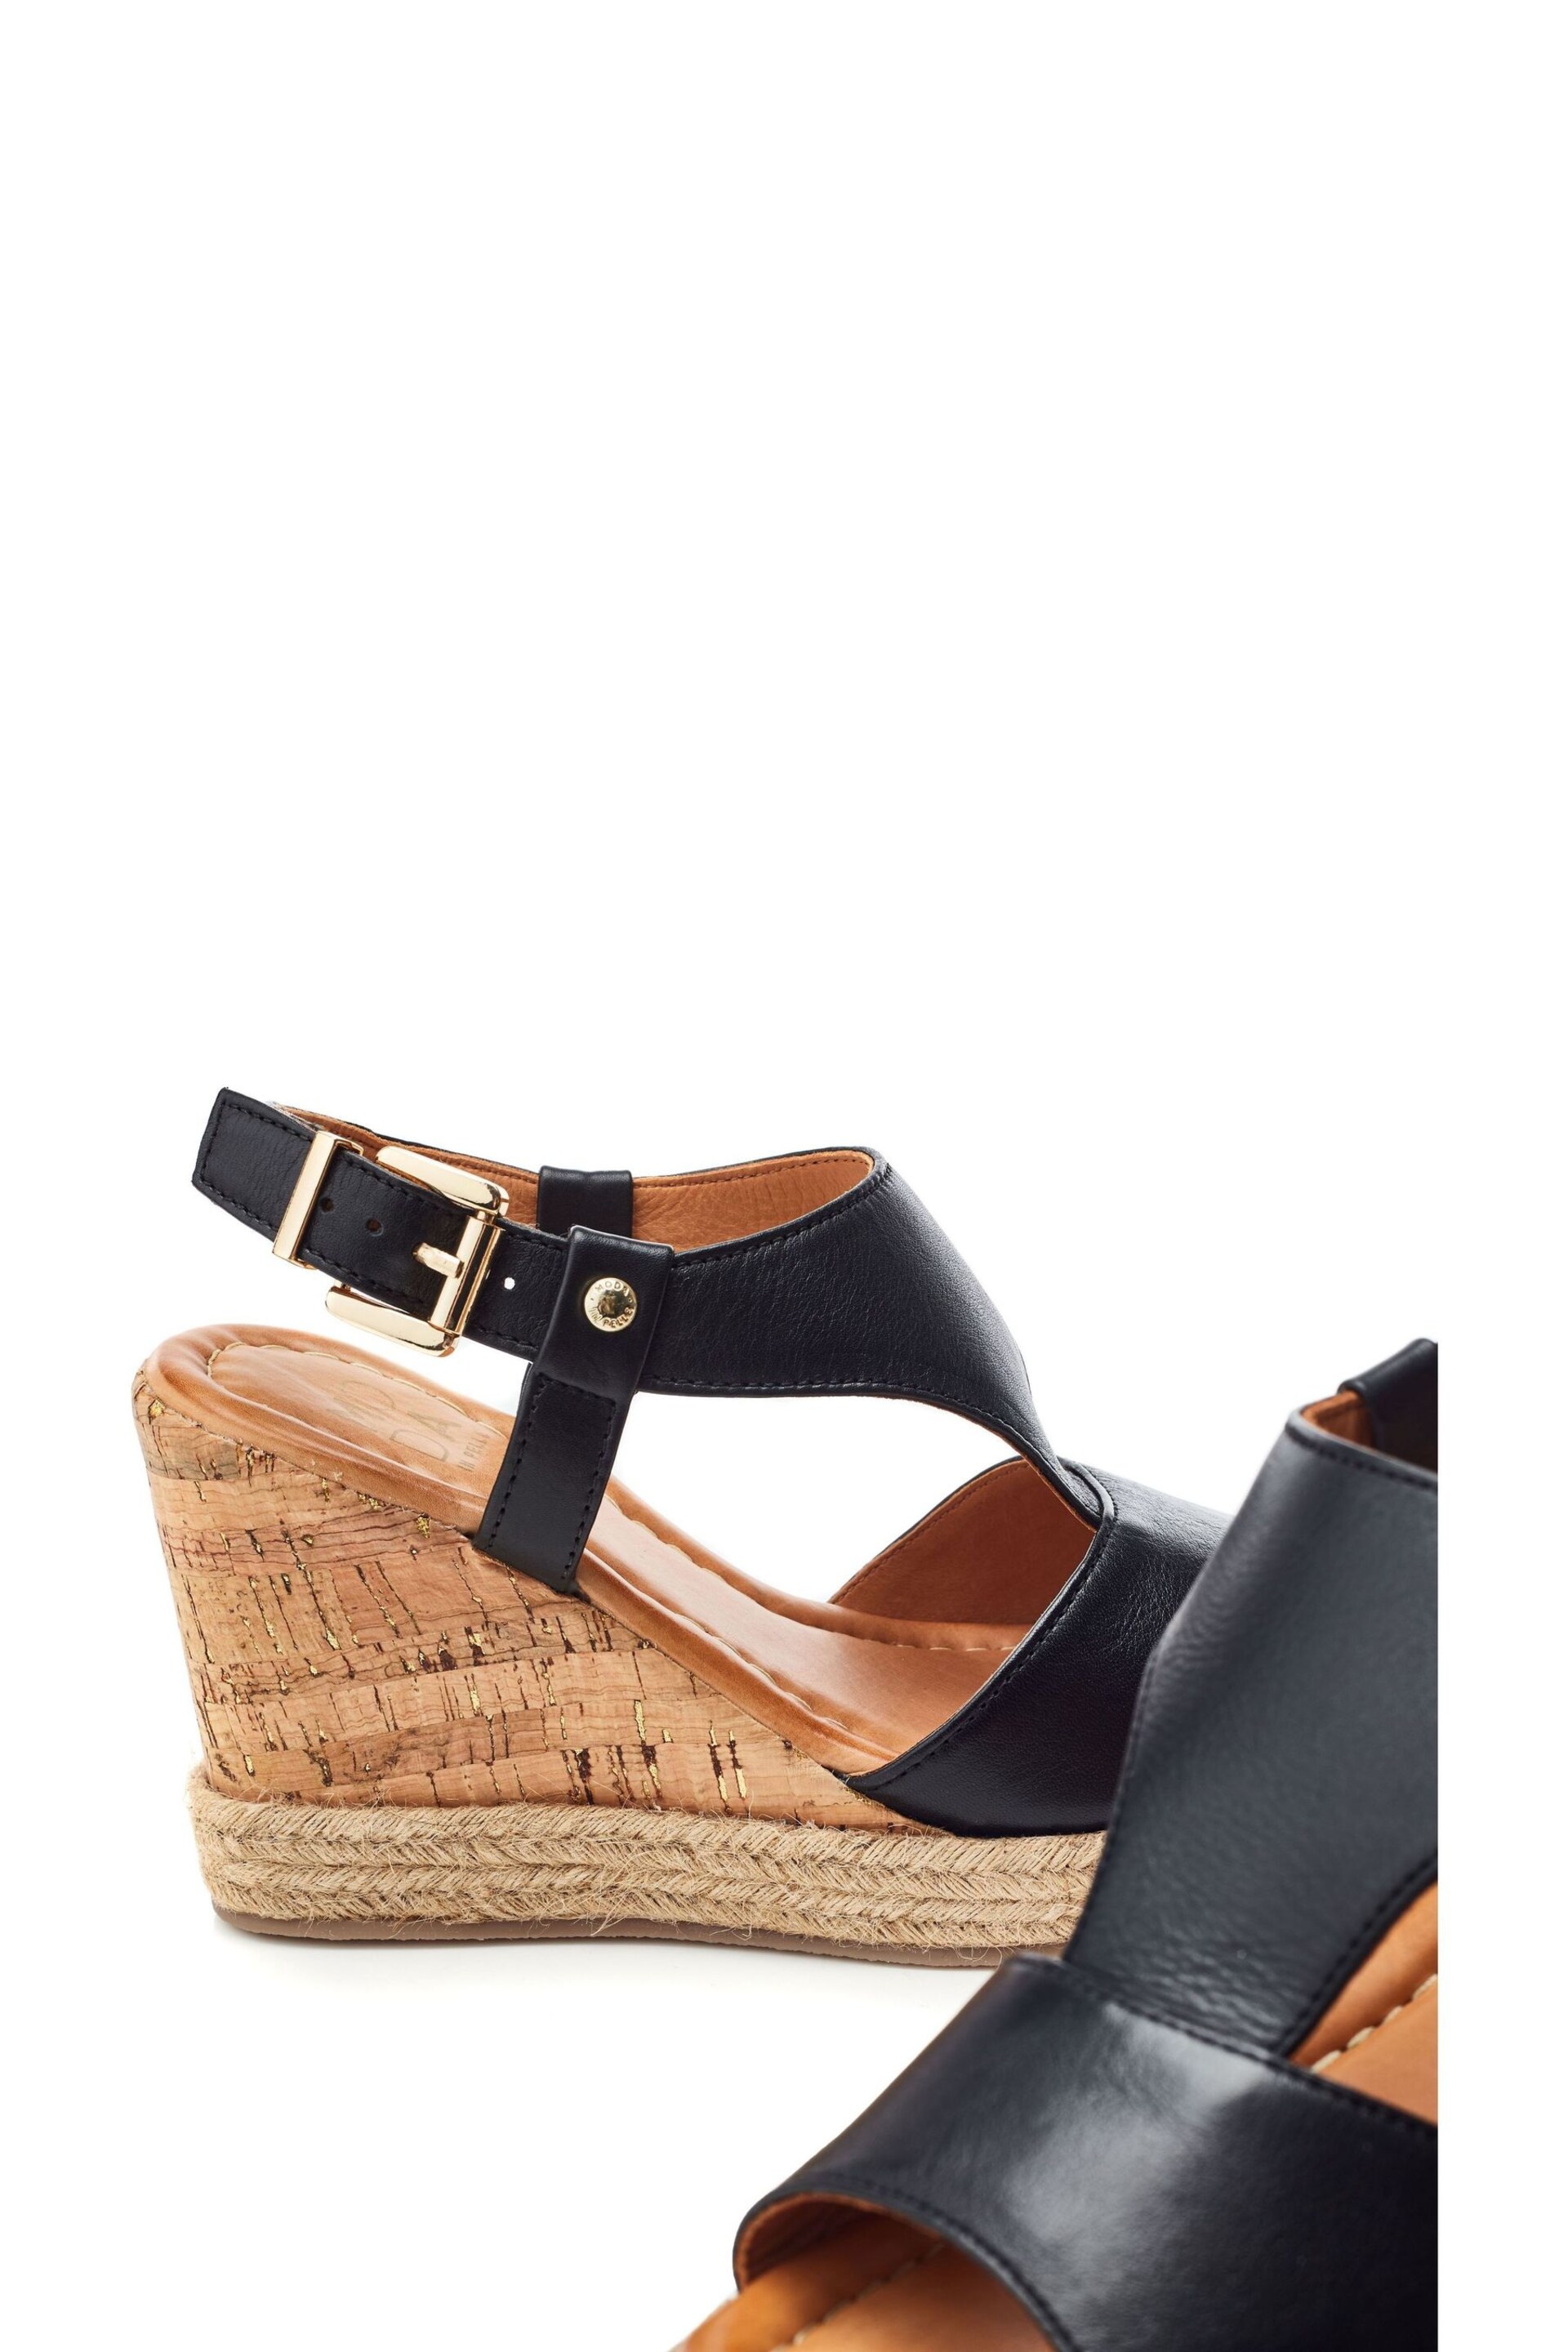 Moda in Pelle Petrina T-Bar Front Wedge Black Sandals - Image 4 of 4